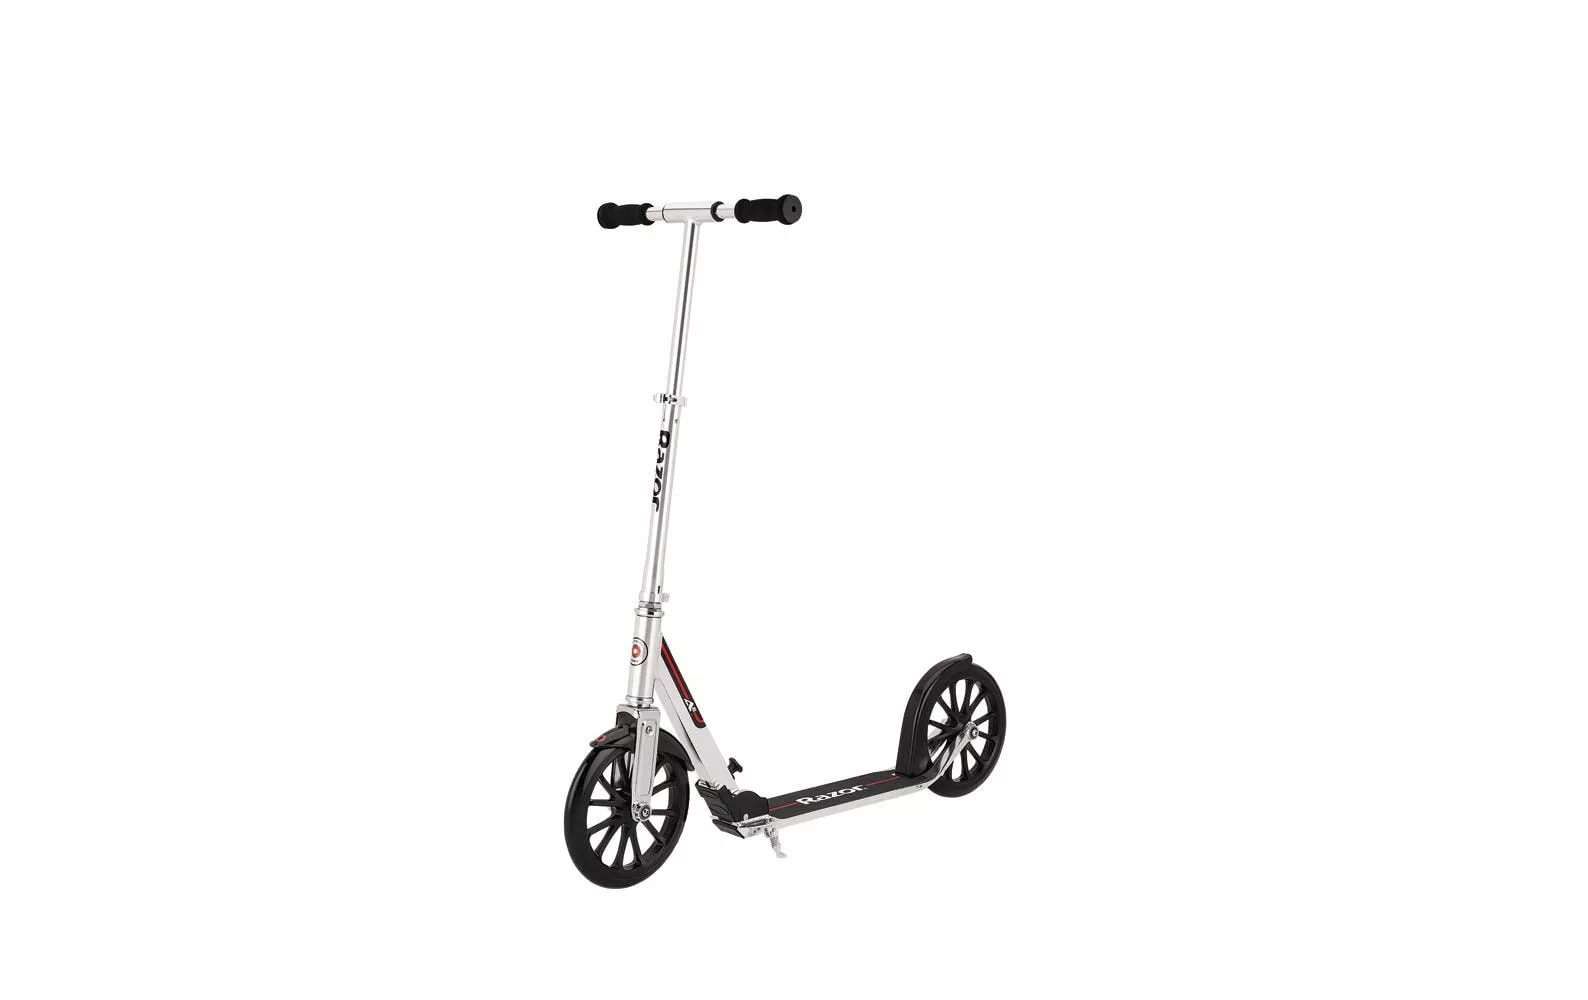 Scooter A6 Silber 23L